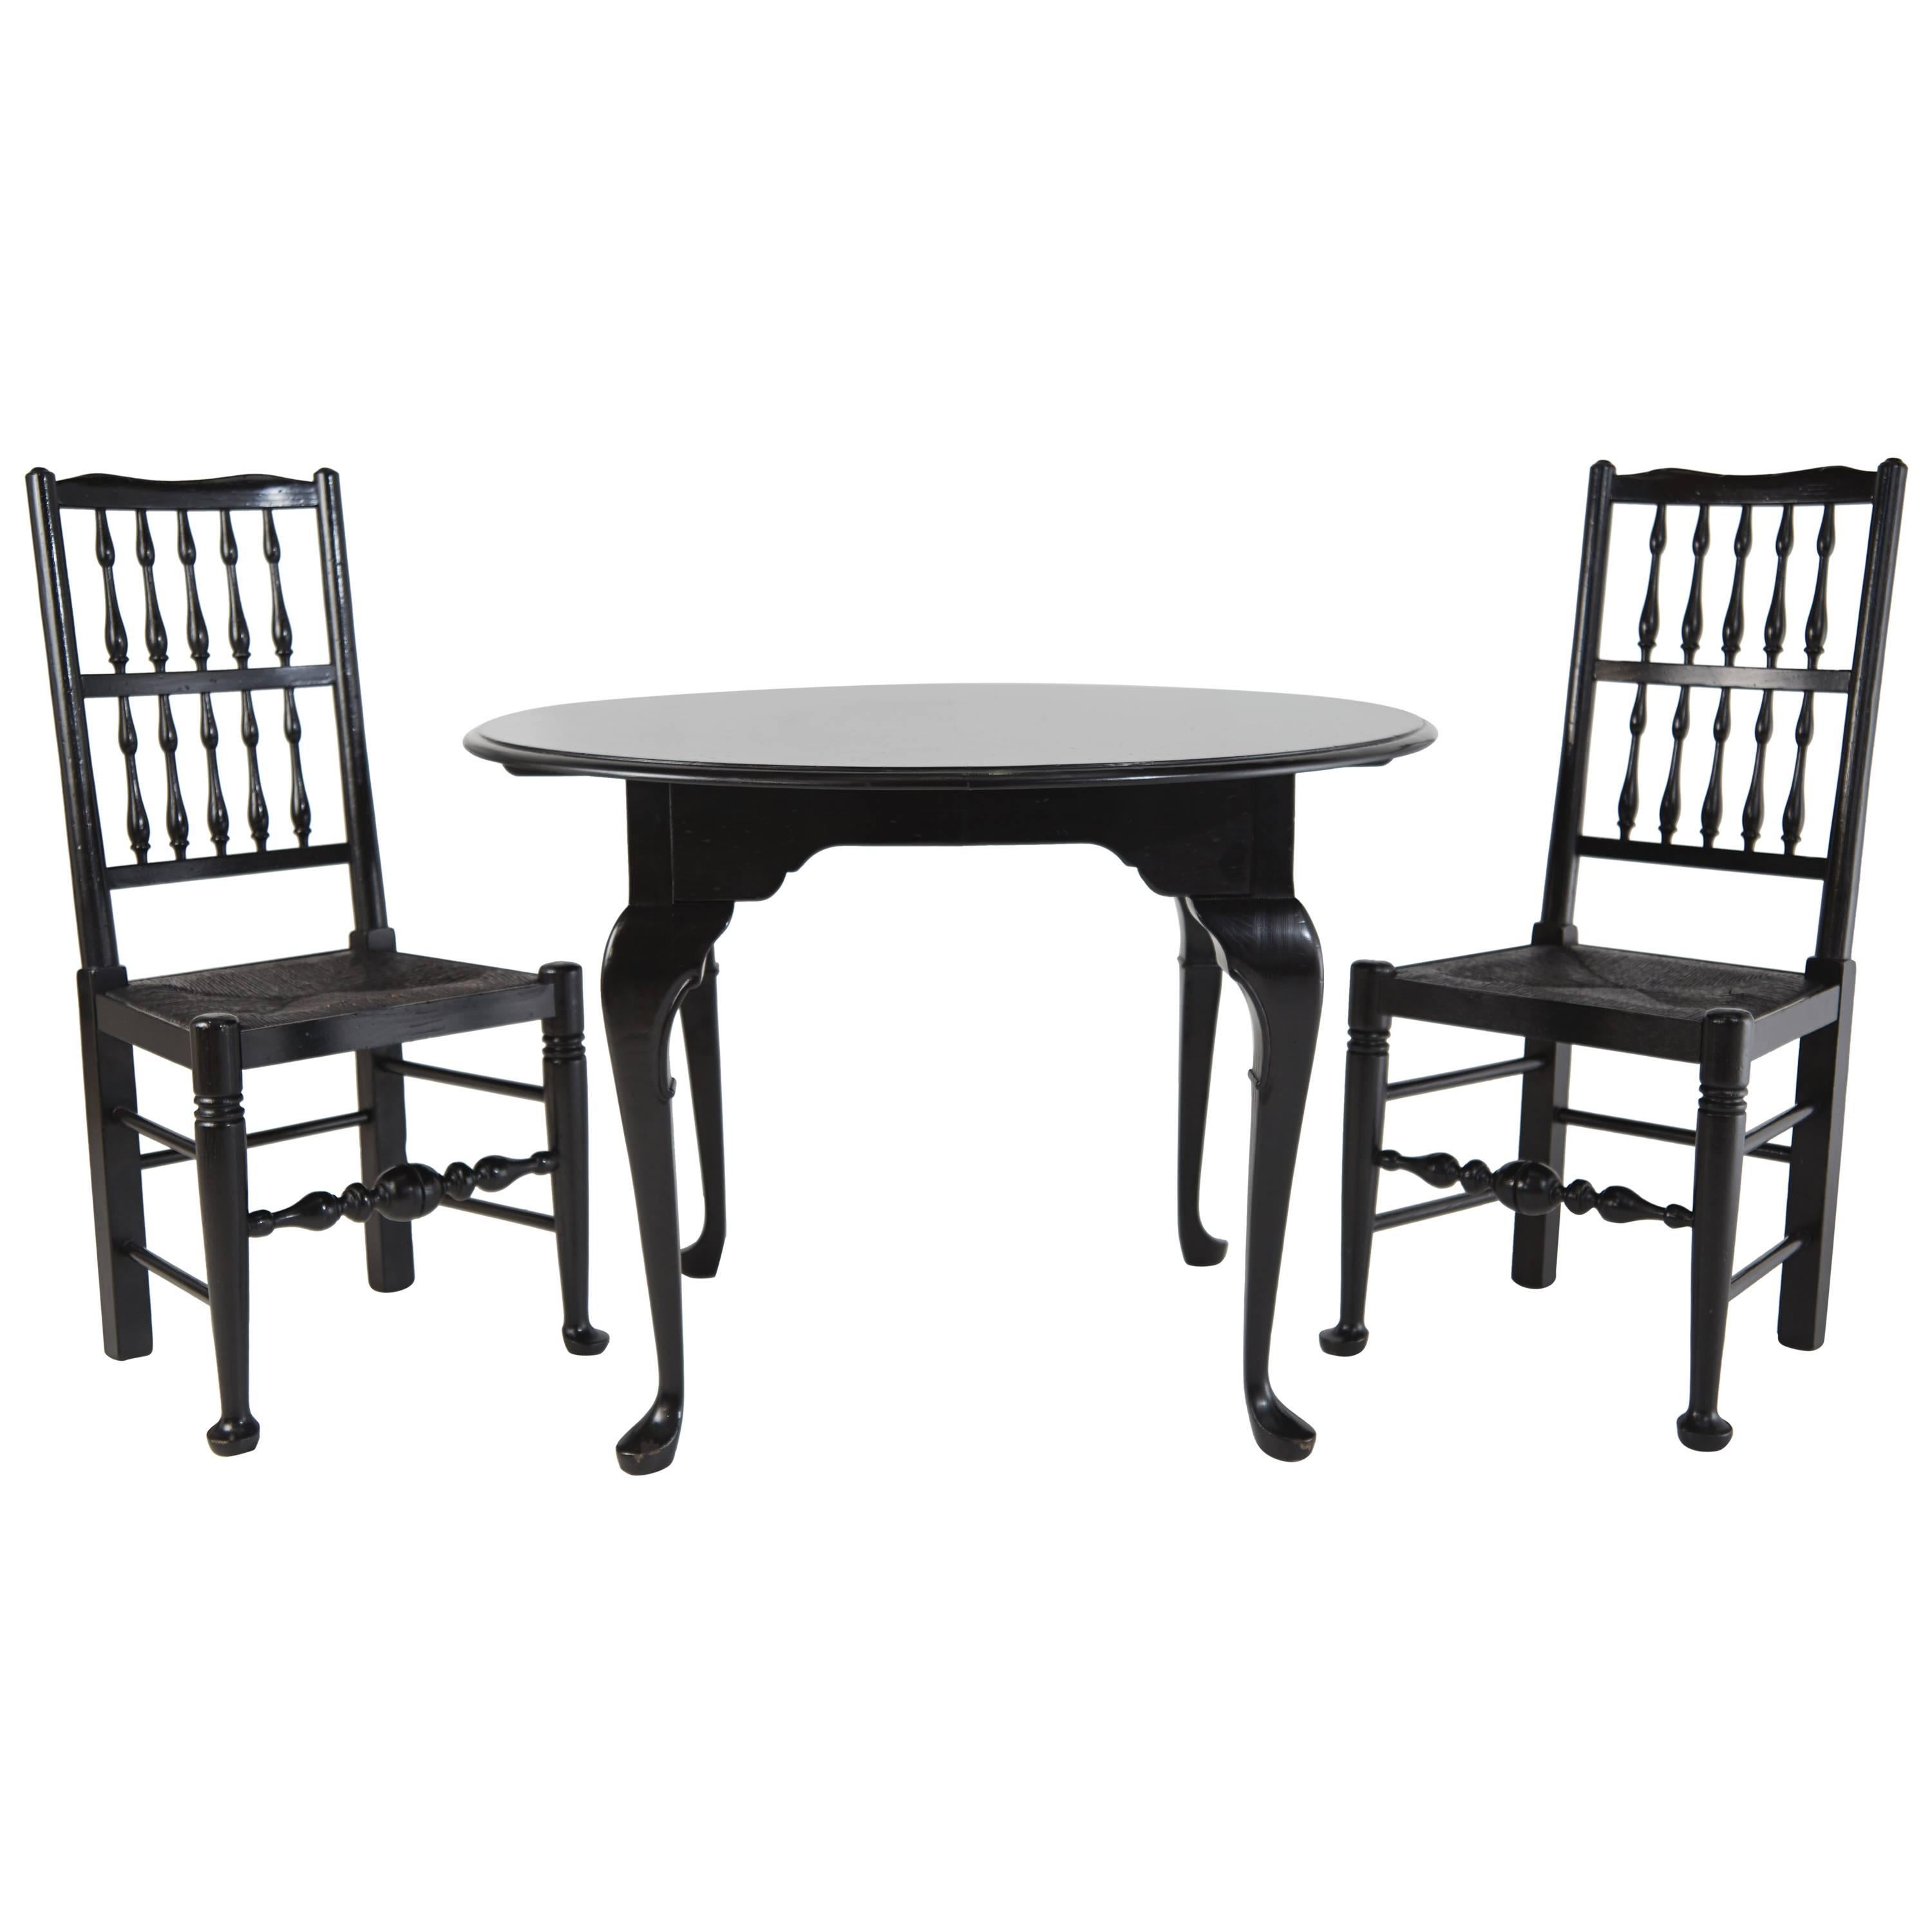 Black Lacquer Colonial Revival & Queen Anne Style Chairs and Table